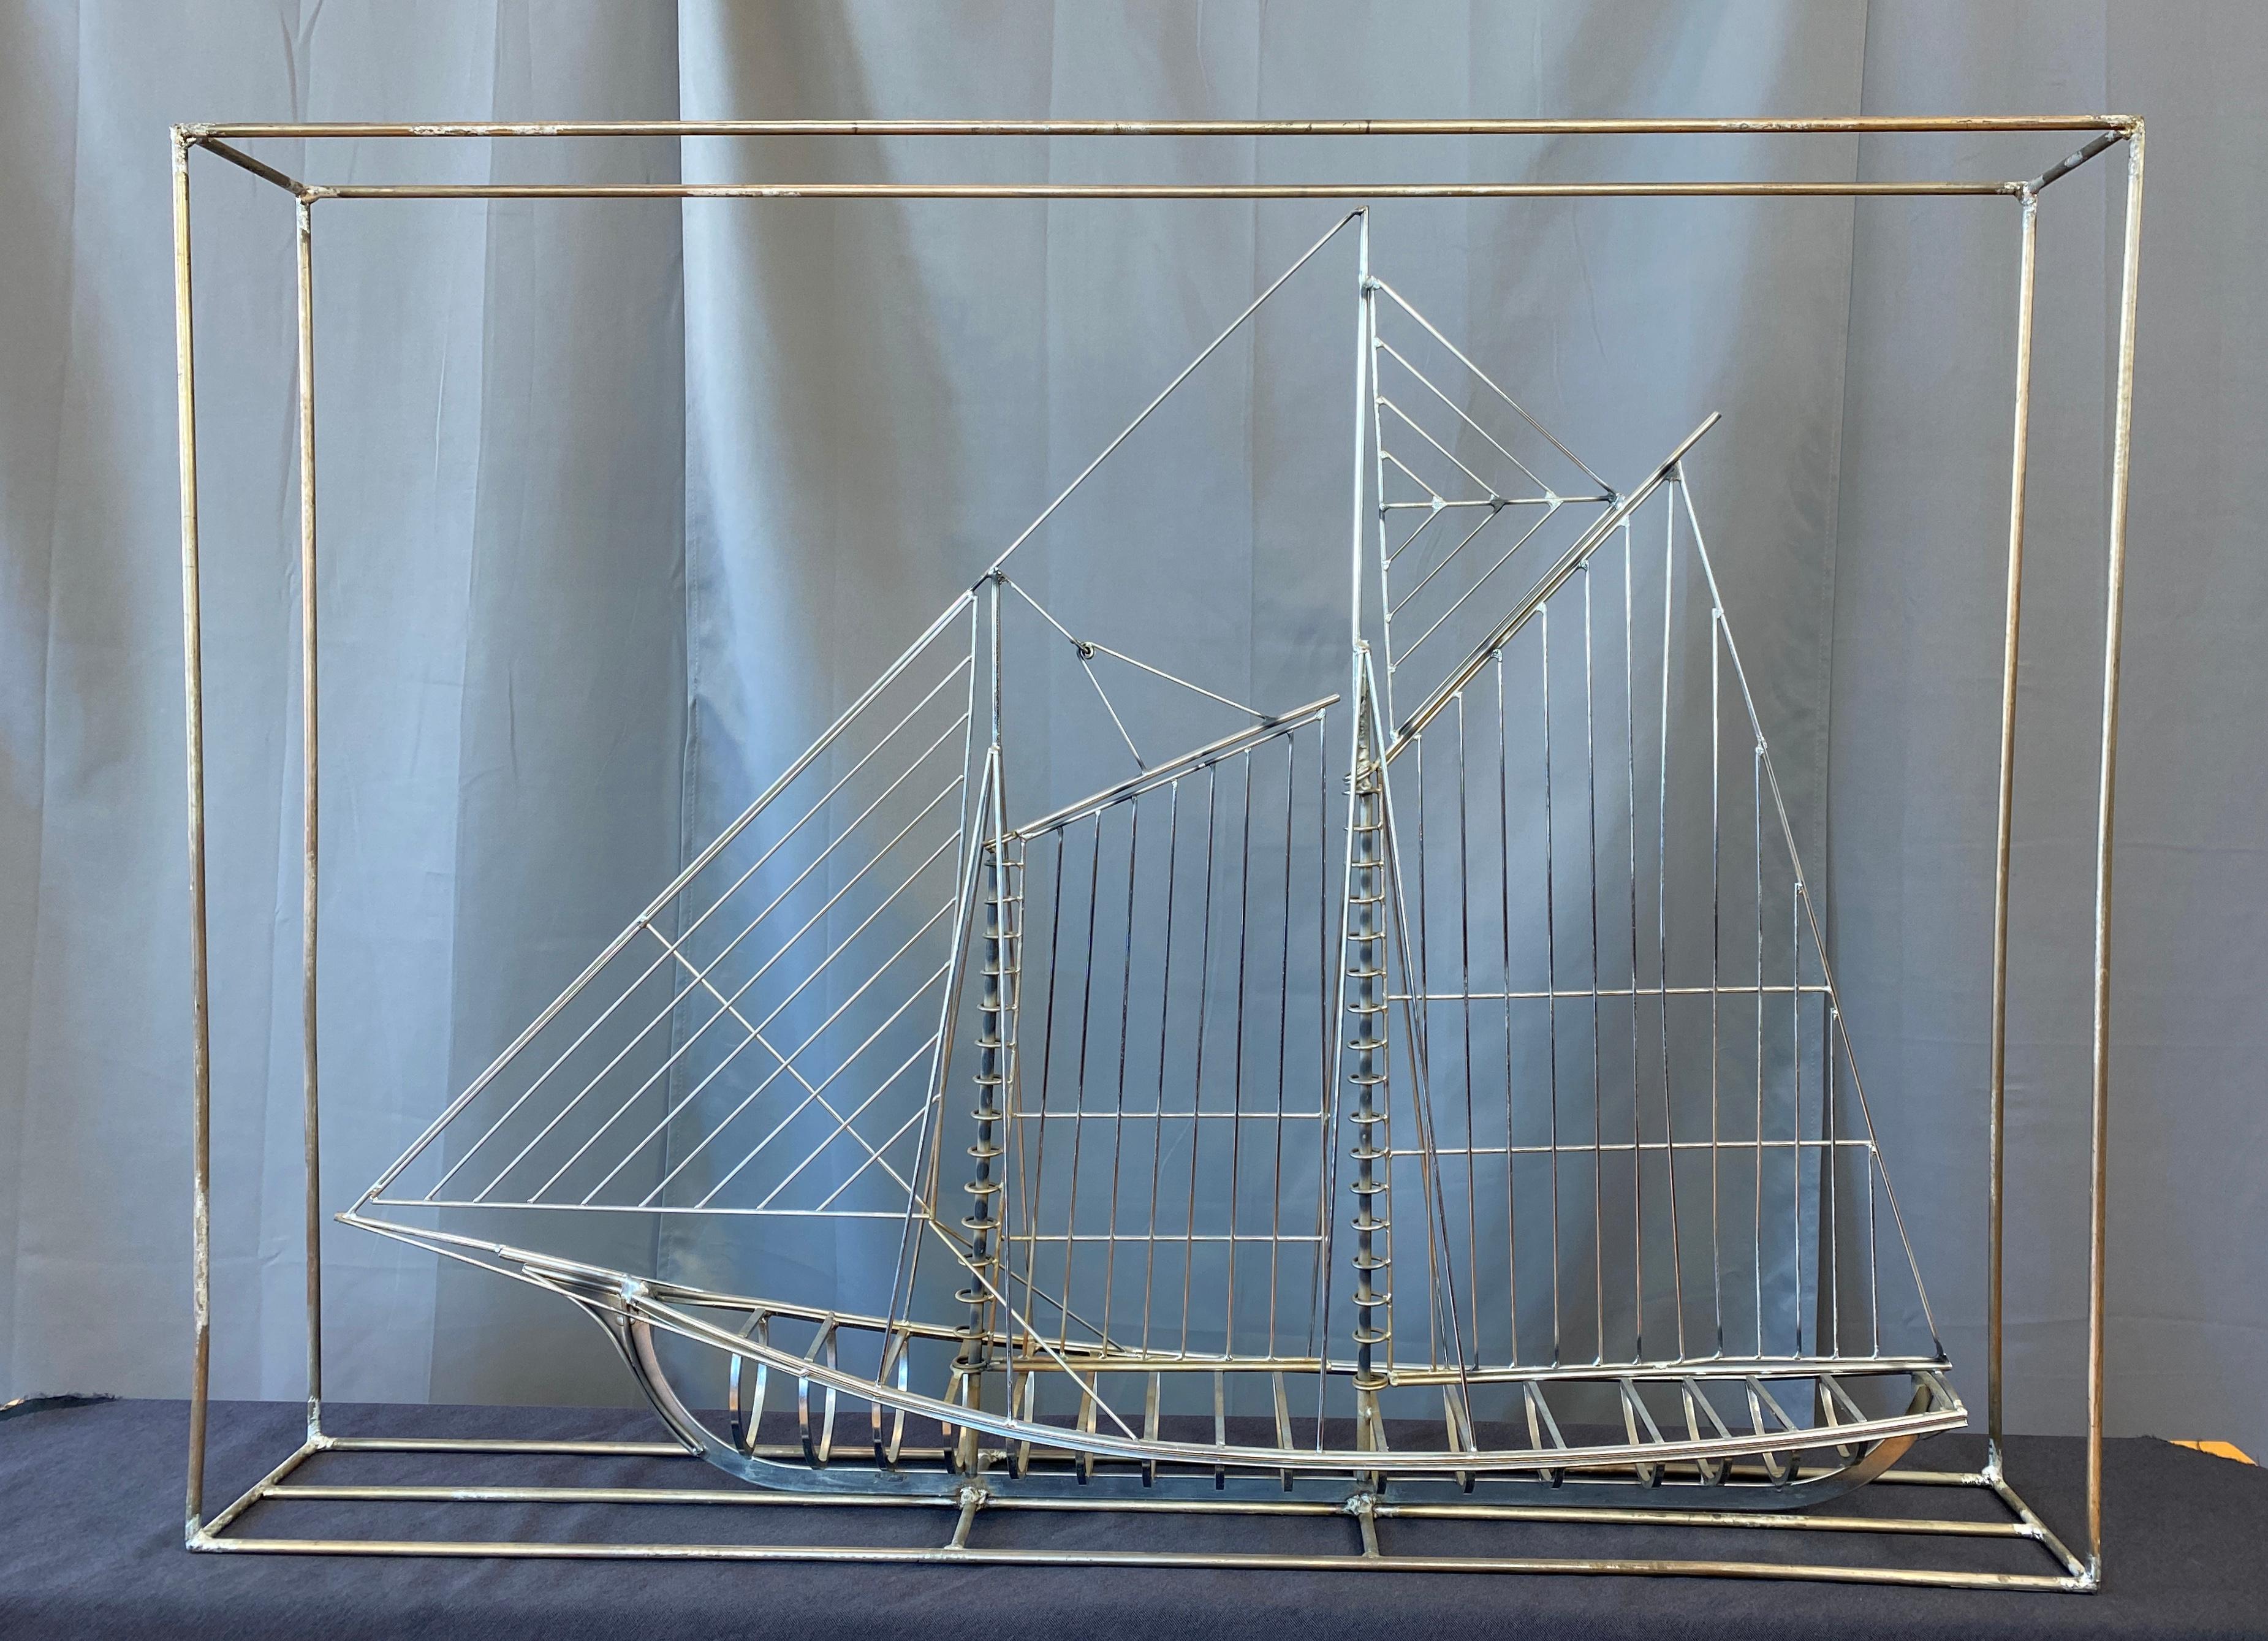 A monumental free-standing metal ship sculpture by Curtis Jeré, signed. 

Crafted out of shaped and welded steel rods, it resembles an architectural line drawing of a clipper ship rendered in 3-D. Features a rarely seen “box” frame within which